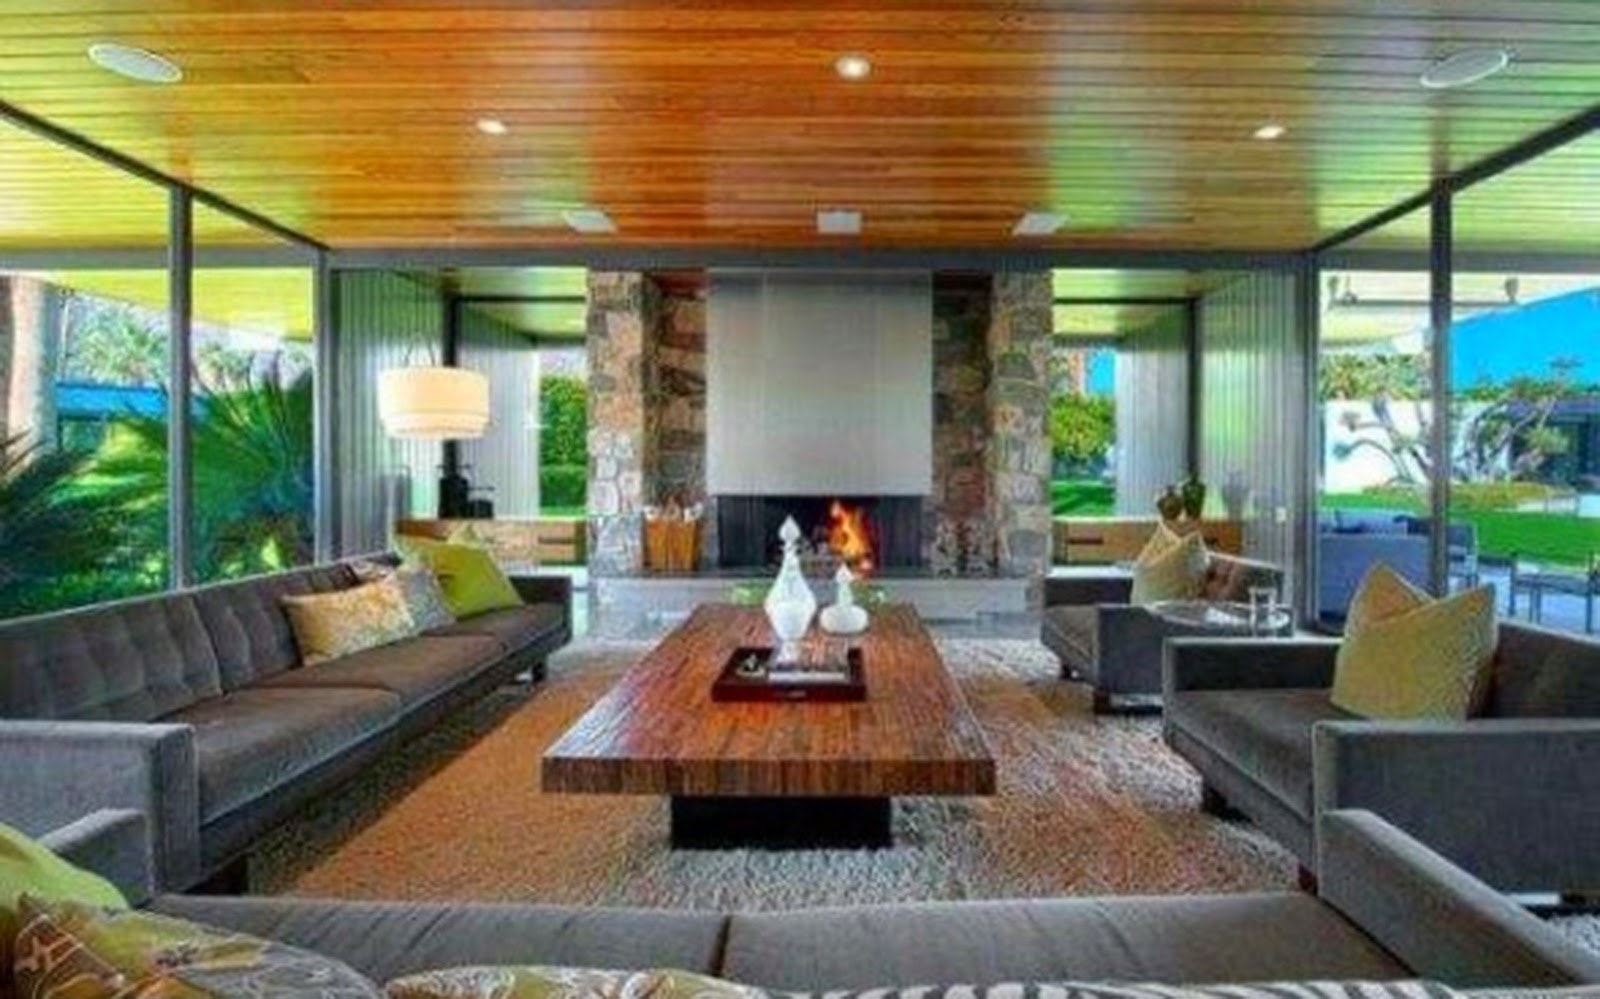 You can rent out Leonardo DiCaprio’s stunning Palm Springs home. Image: Trulia